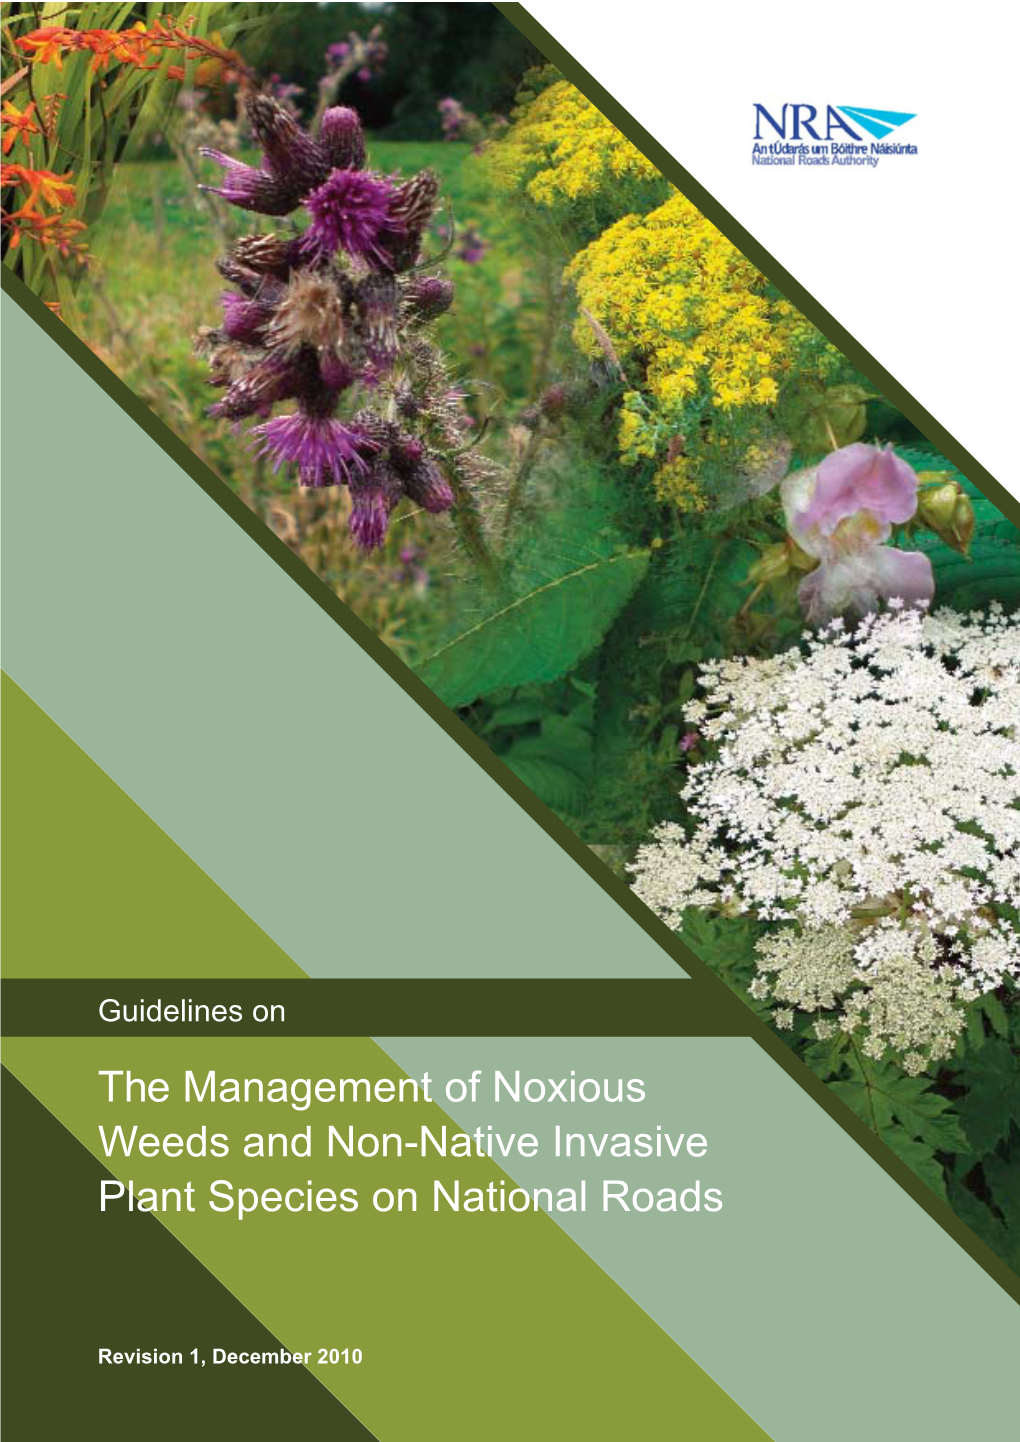 Guidelines on the Management of Noxious Weeds and Non-Native Invasive Plant Species on National Roads